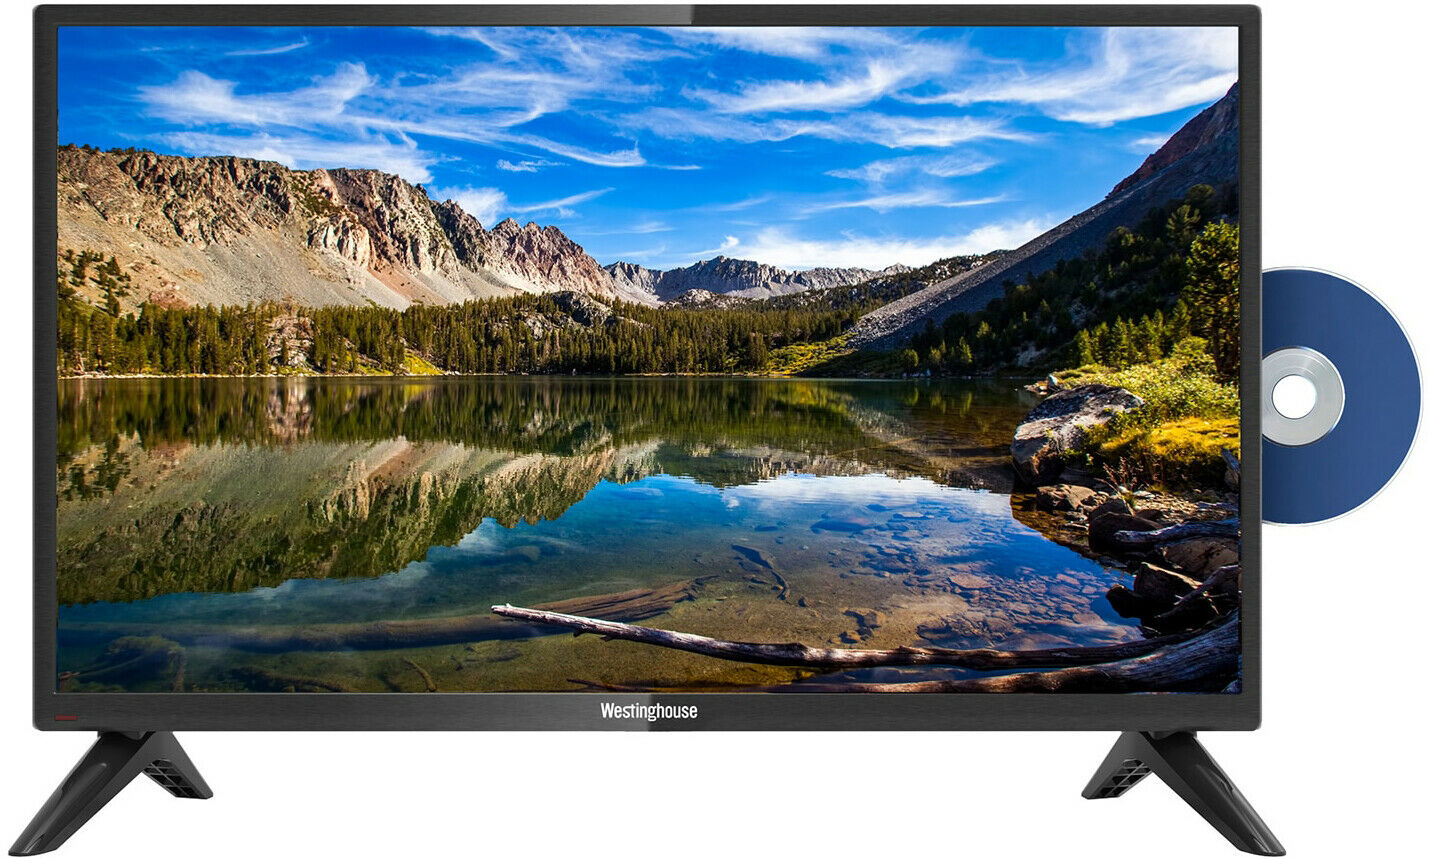 Westinghouse 32" HD LED TV with Built-in DVD Player